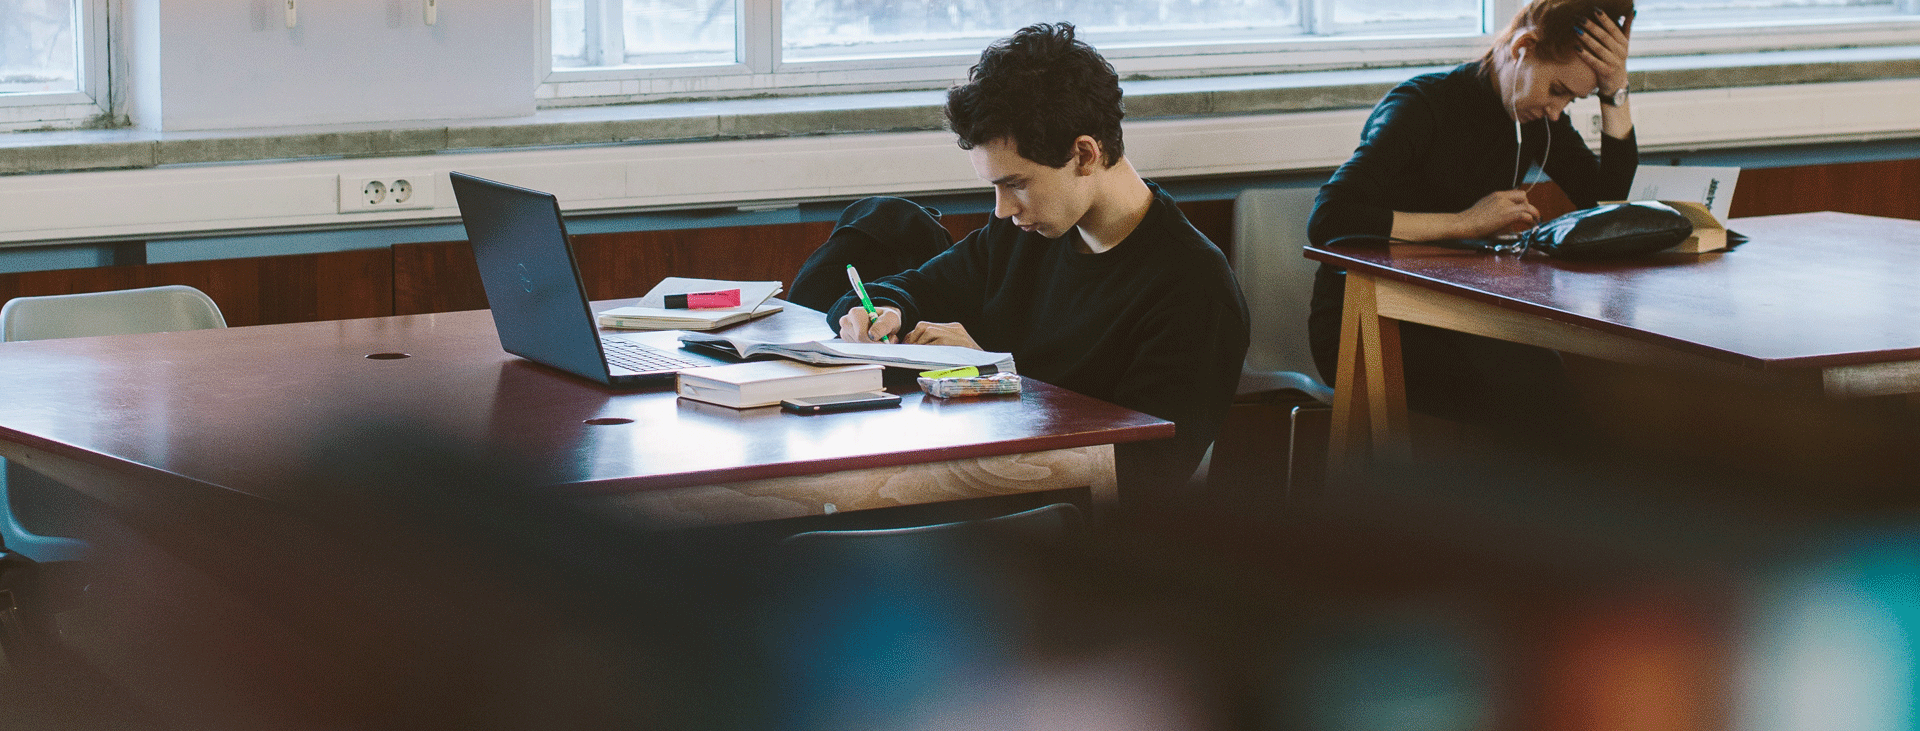 Two students studying at tables